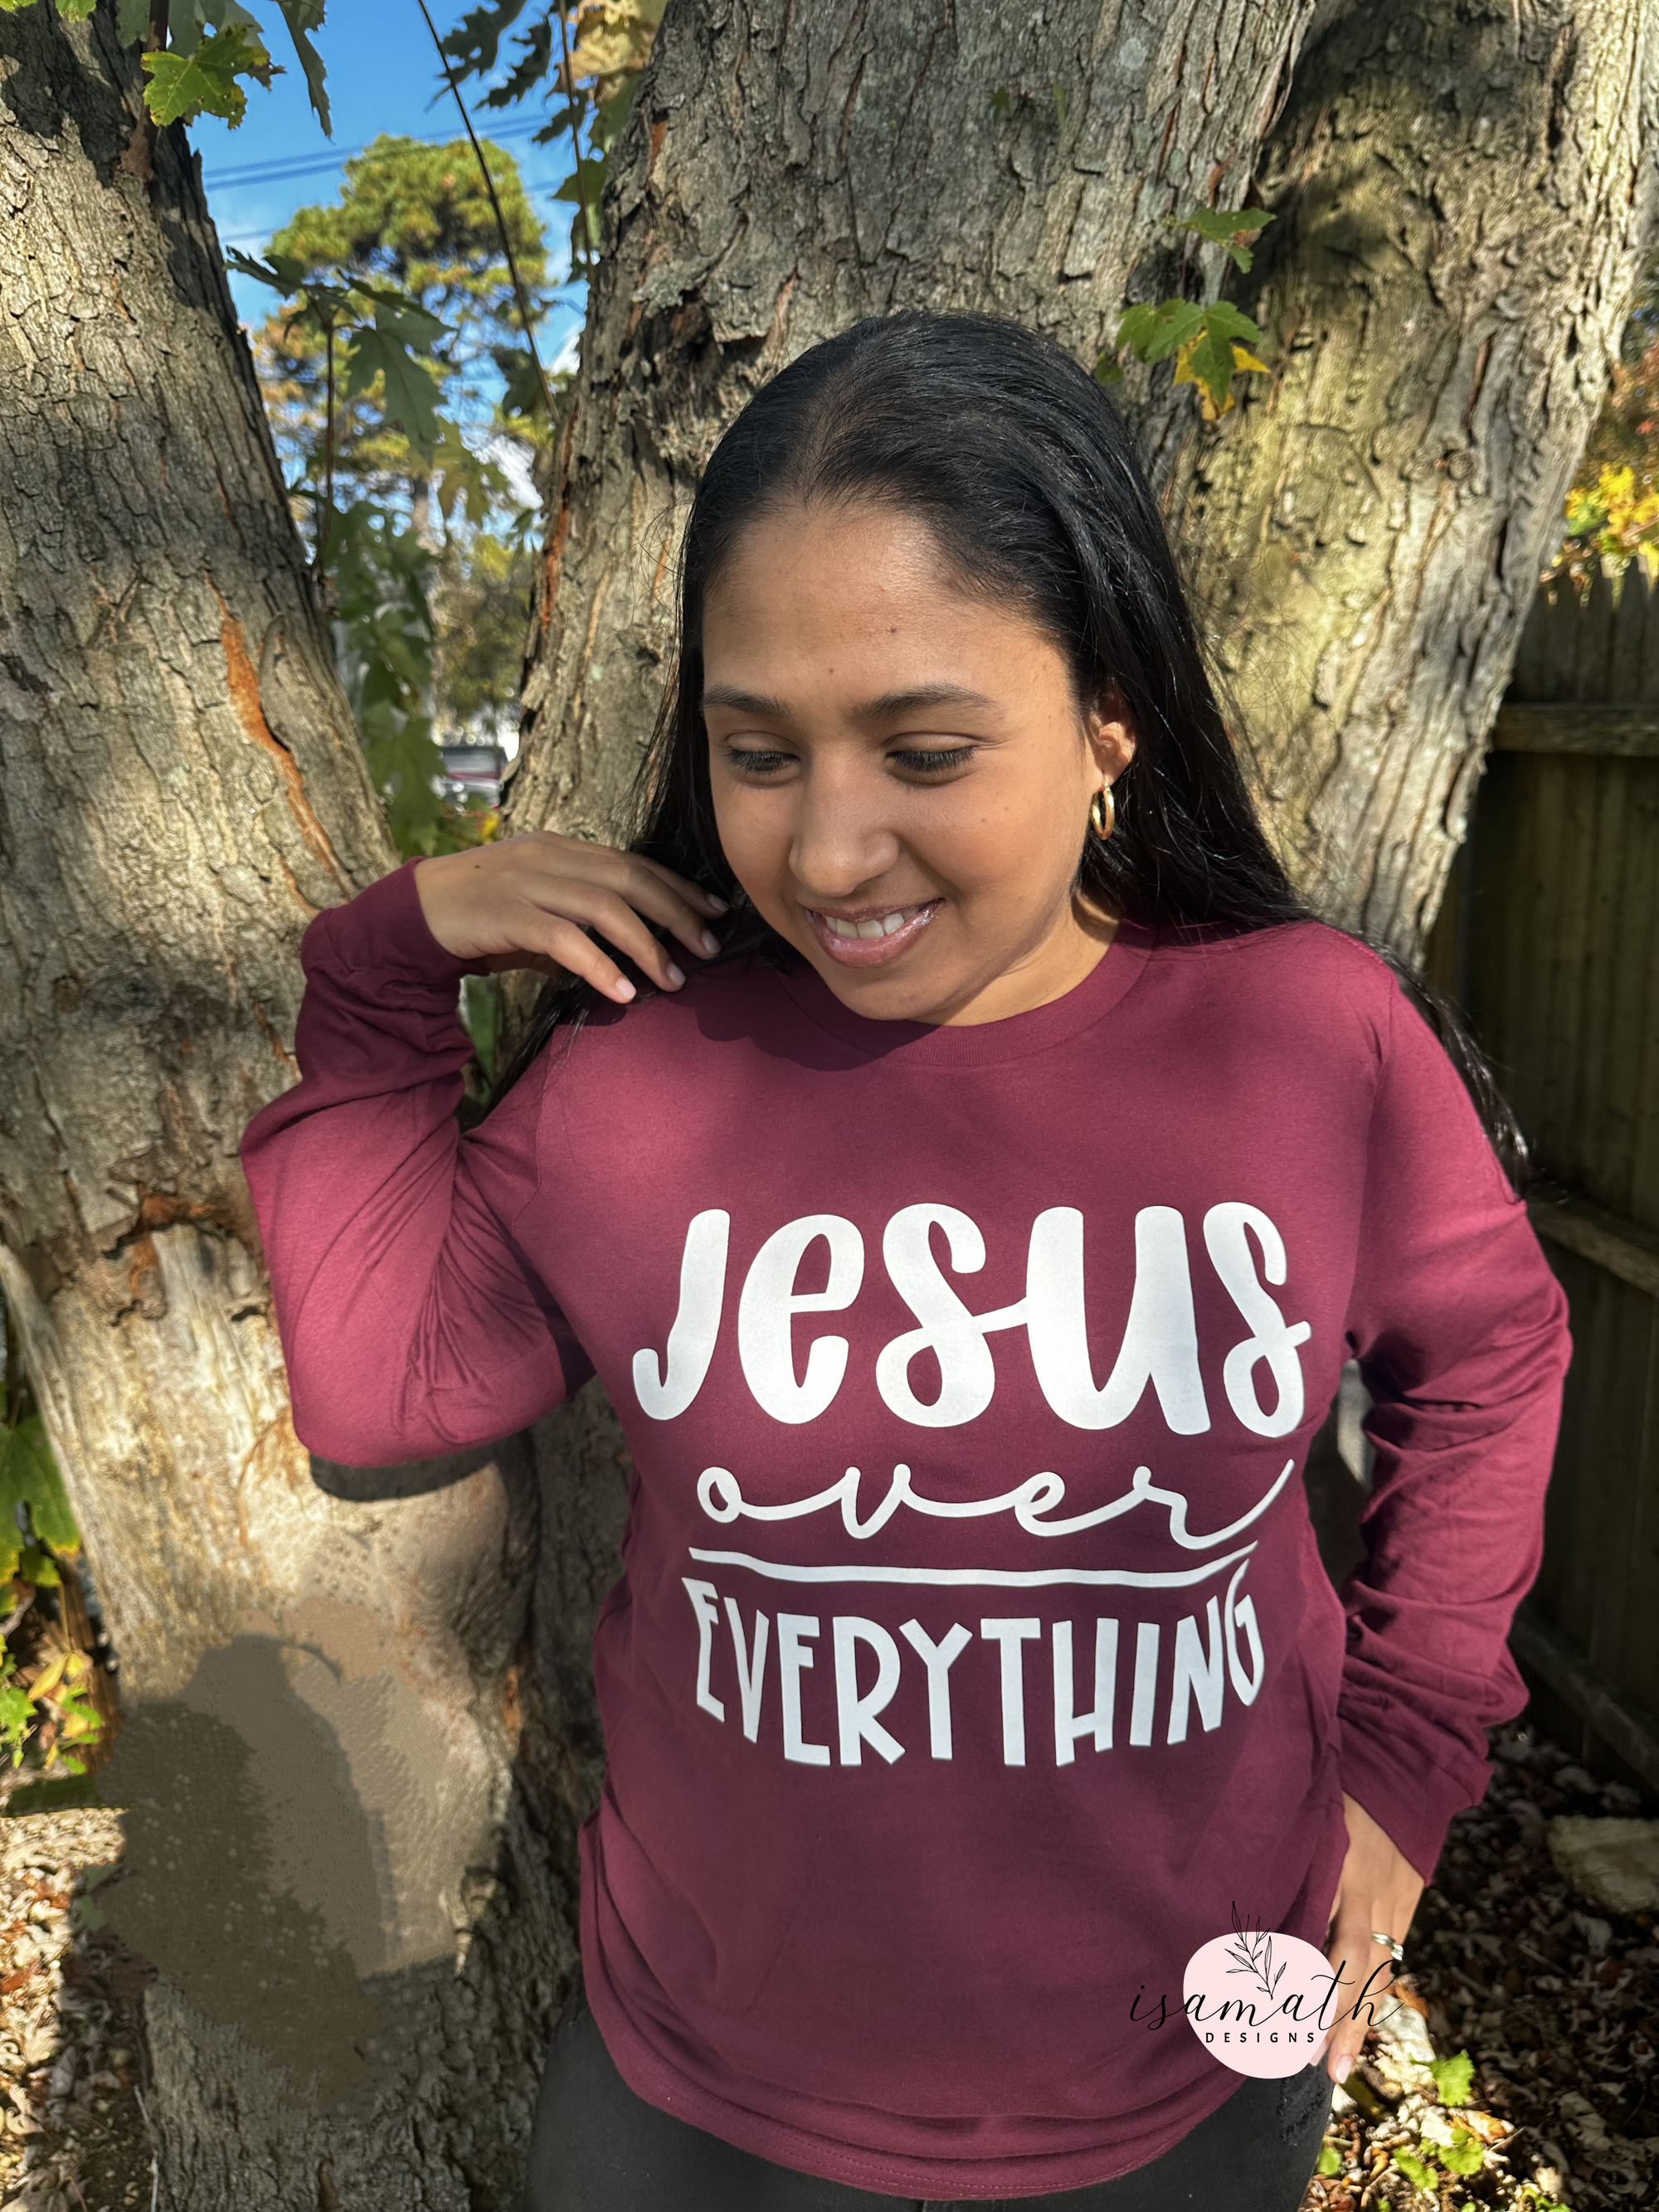 Jesus over everything - long sleeve t-shirt